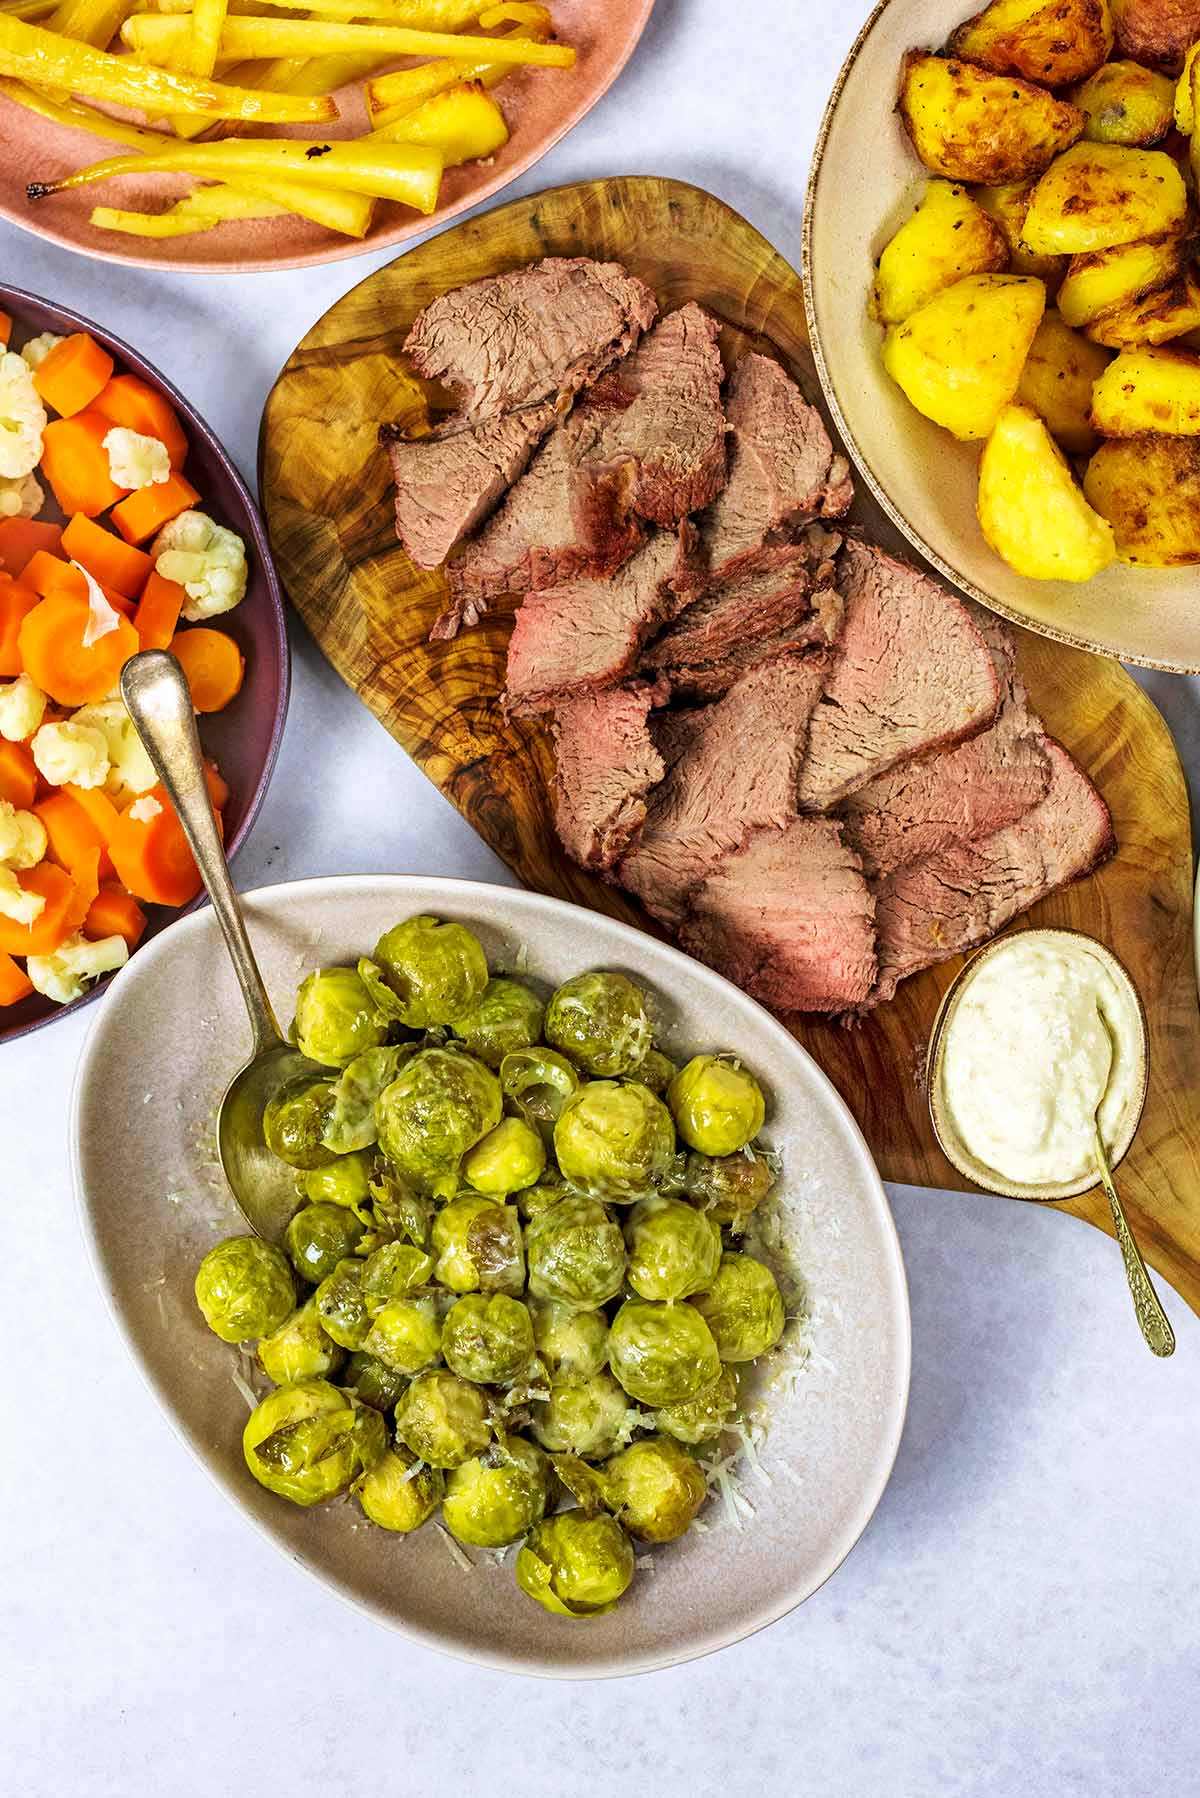 A bowl of Brussels sprouts next to a board of roast beef, some potatoes, carrots and parsnips.